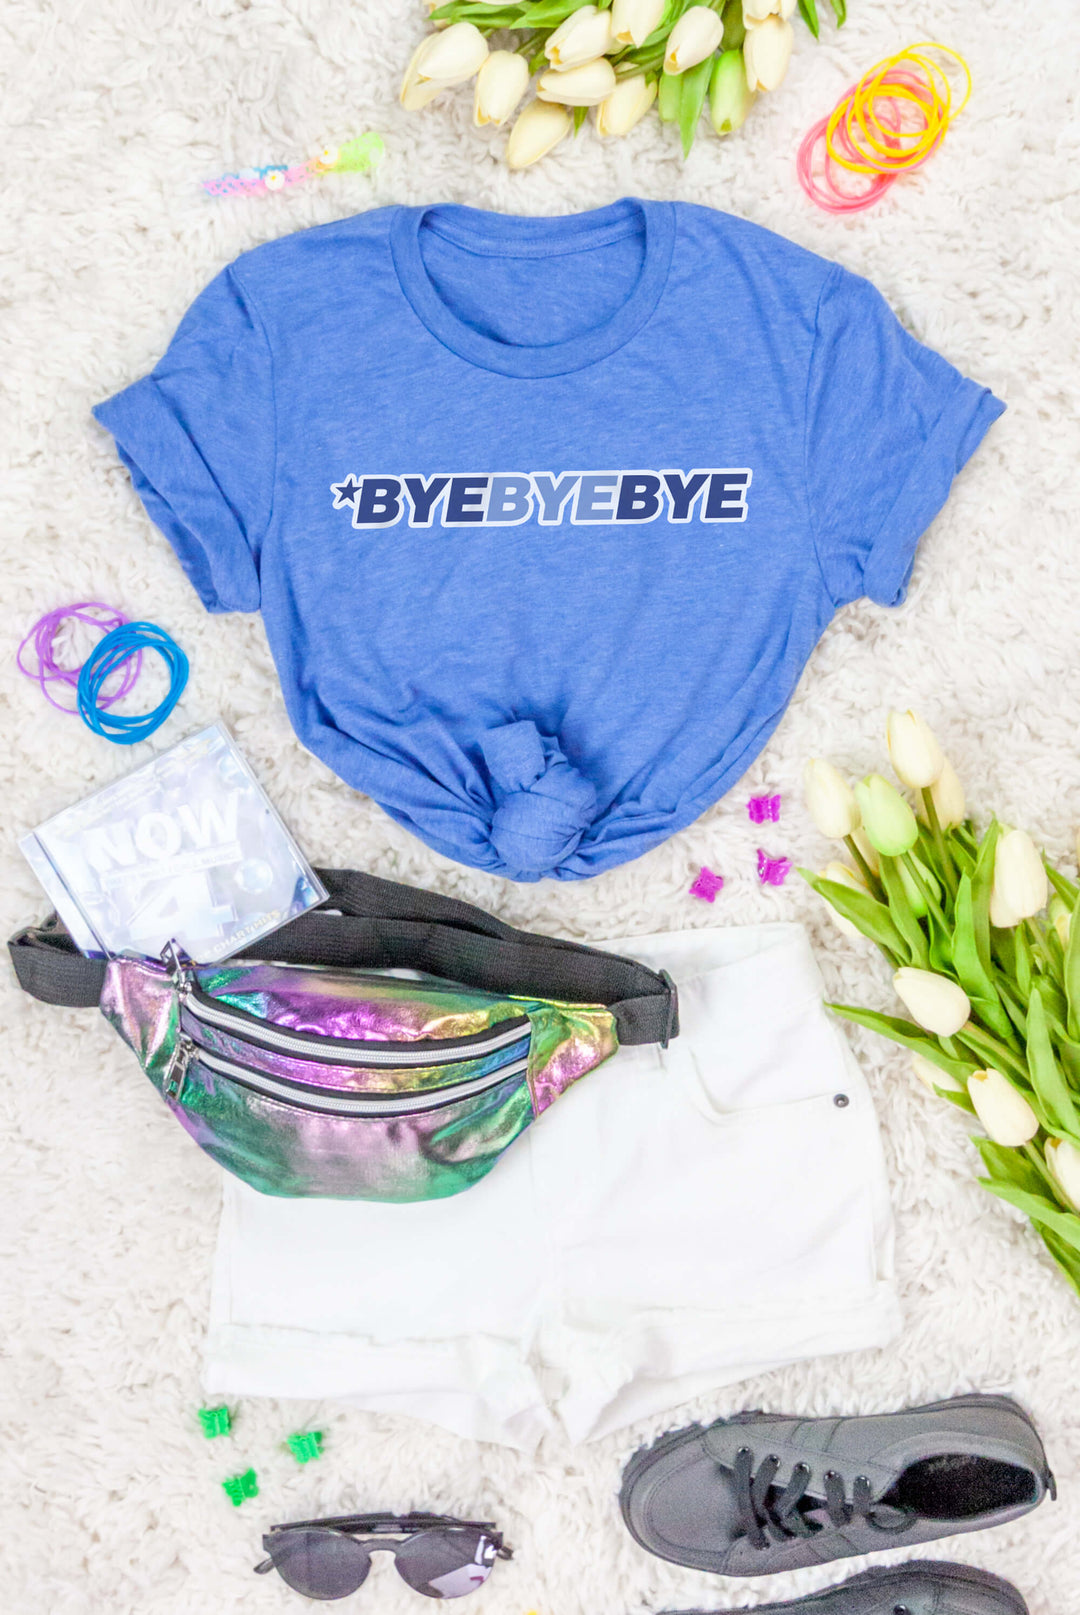 ByeByeBye Tee Shirts -Lots of Color Options - For Your Ultimate Boy Band 90s Party!